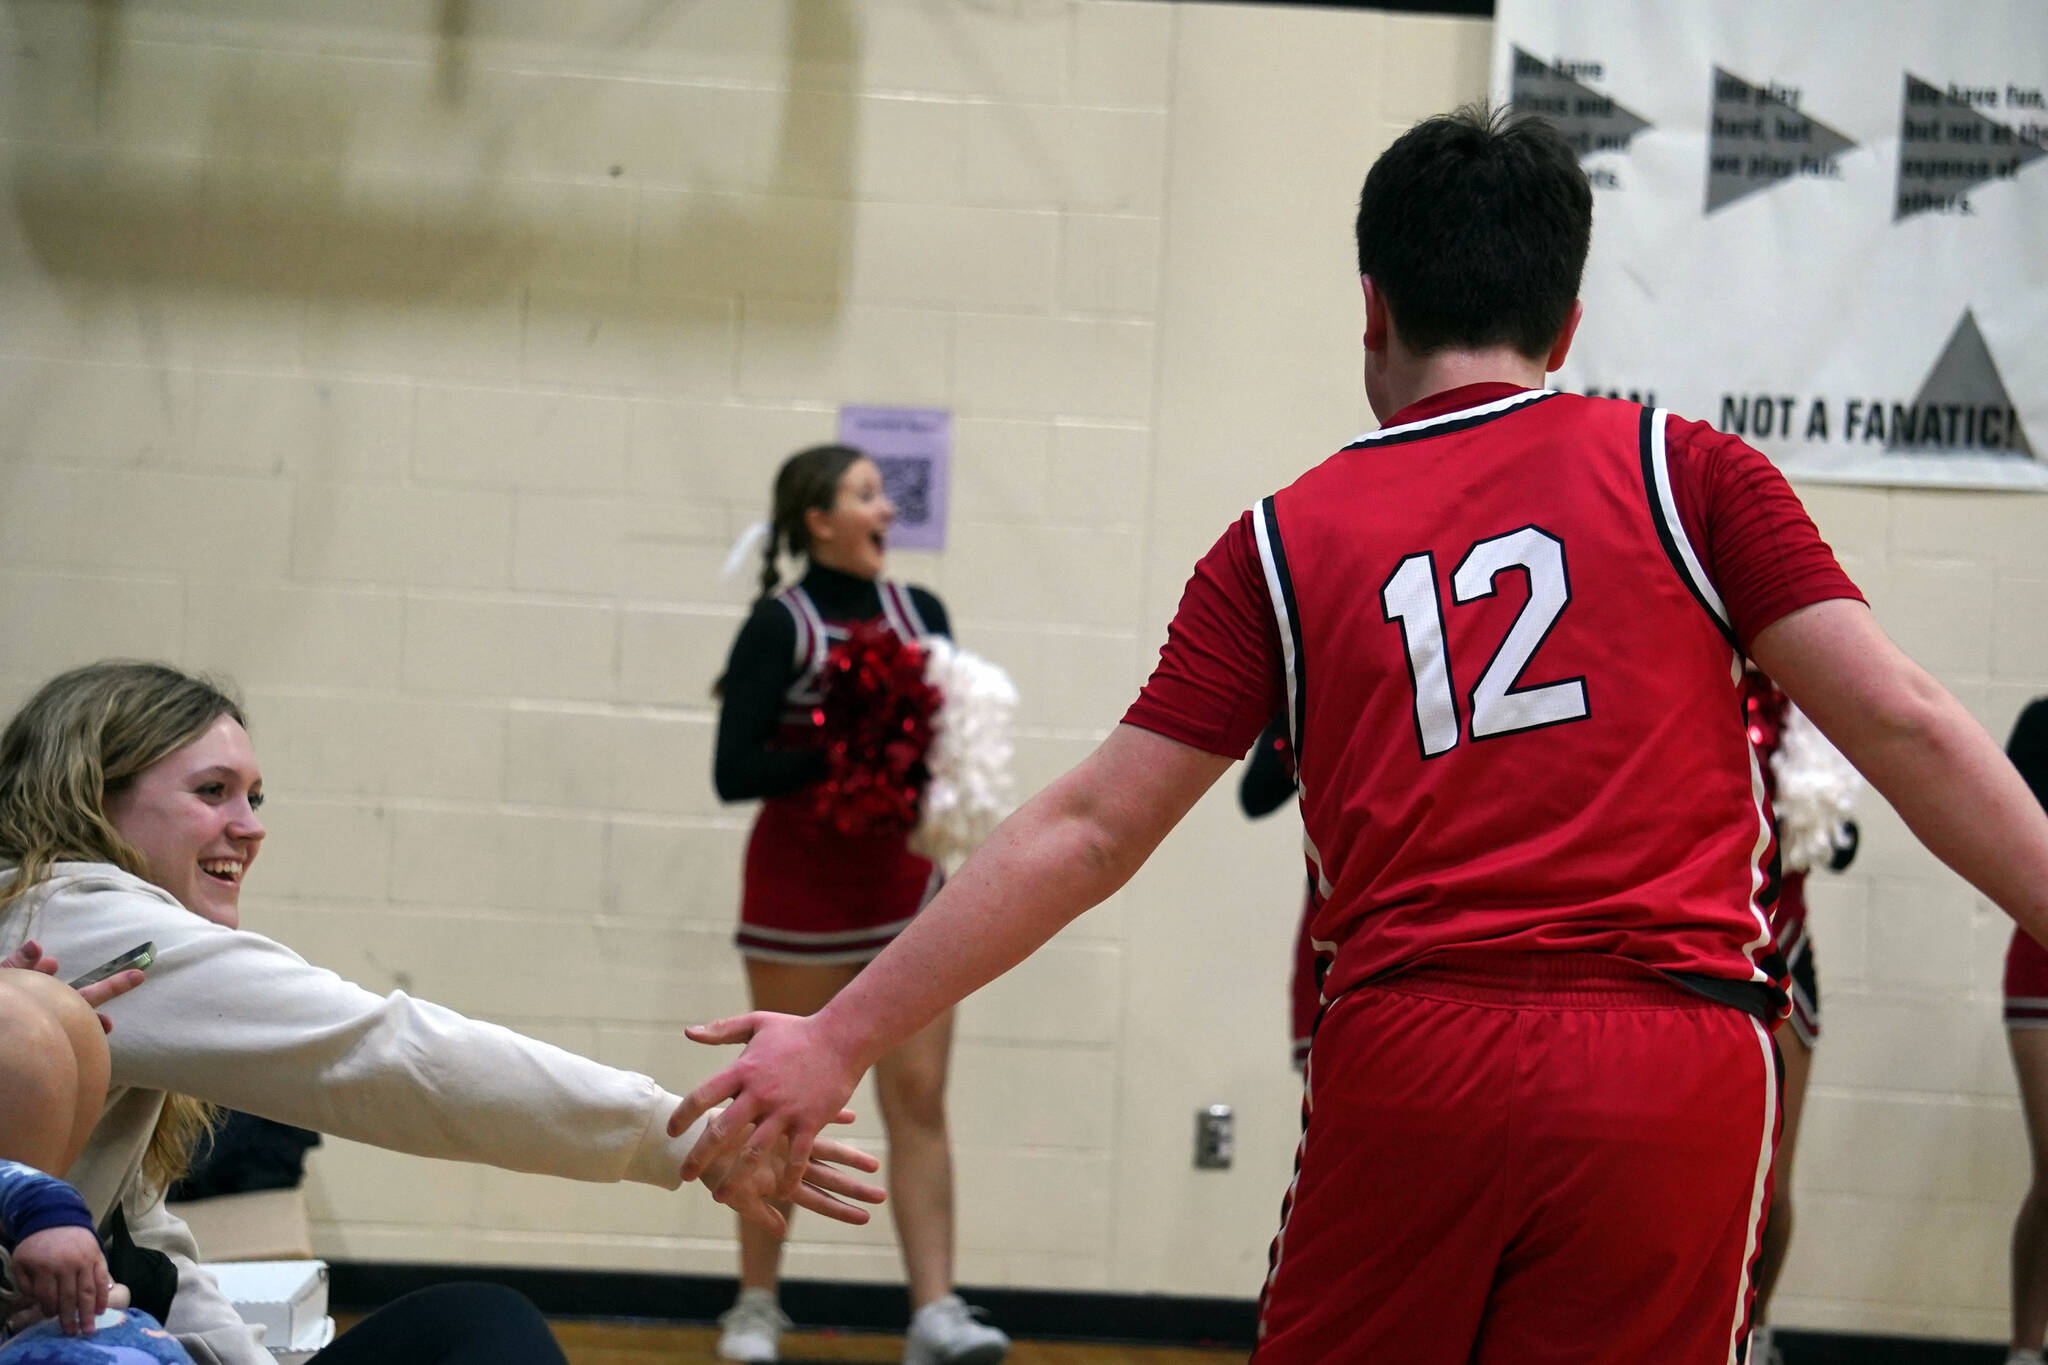 Kenai’s Reid Titus collects high fives from the bleachers after making an unlikely shot during a basketball game at Nikiski Middle/High School in Nikiski, Alaska, on Tuesday, Feb. 20, 2024. (Jake Dye/Peninsula Clarion)